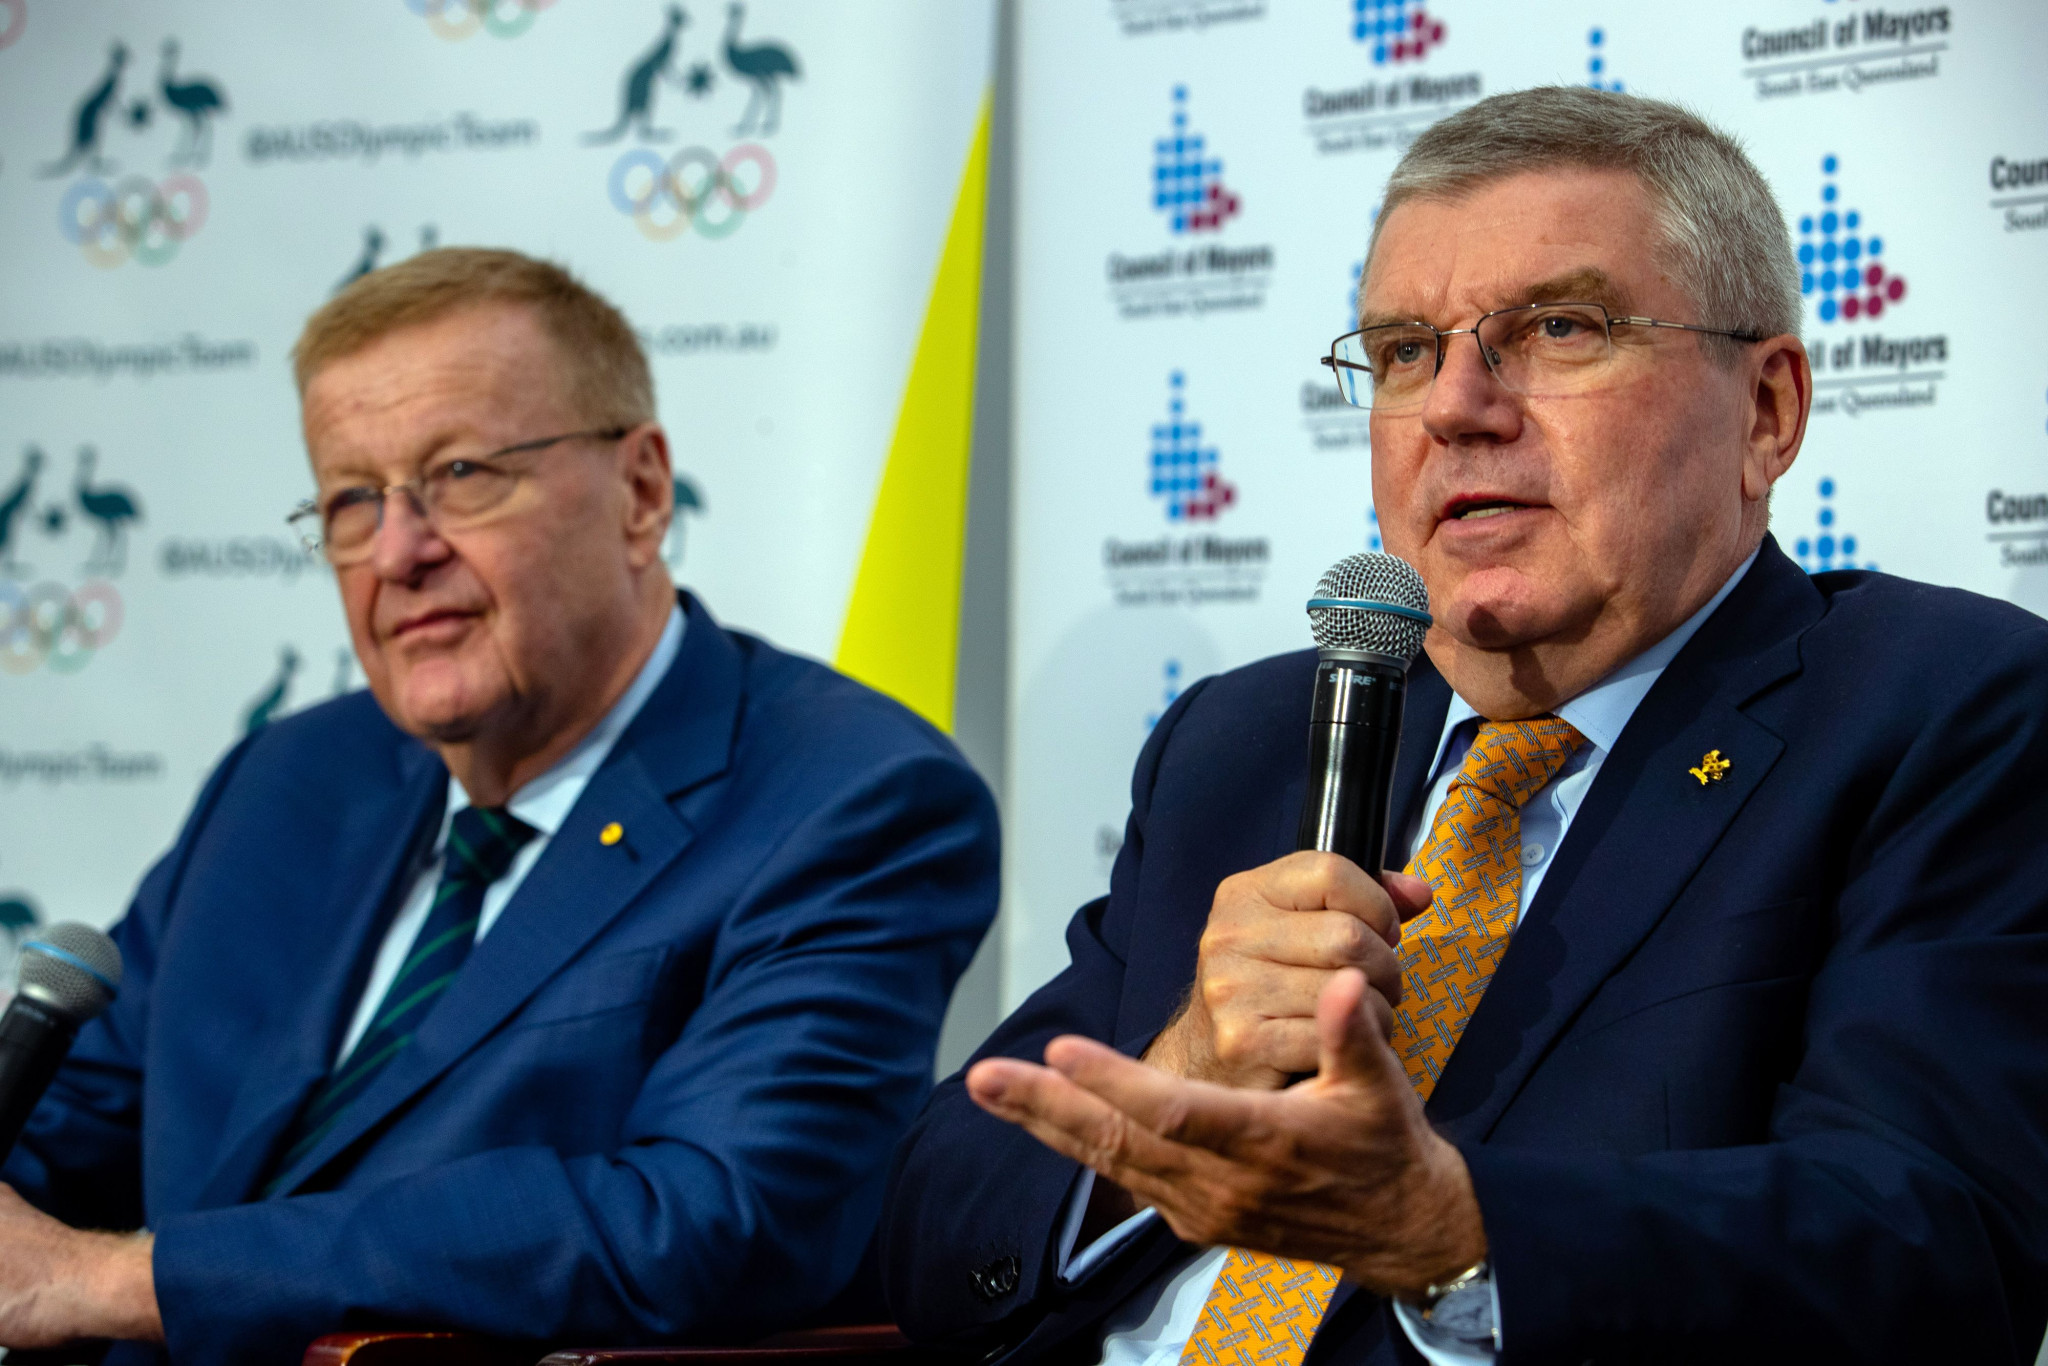 John Coates, left, with International Olympic Committee President Thomas Bach ©Getty Images